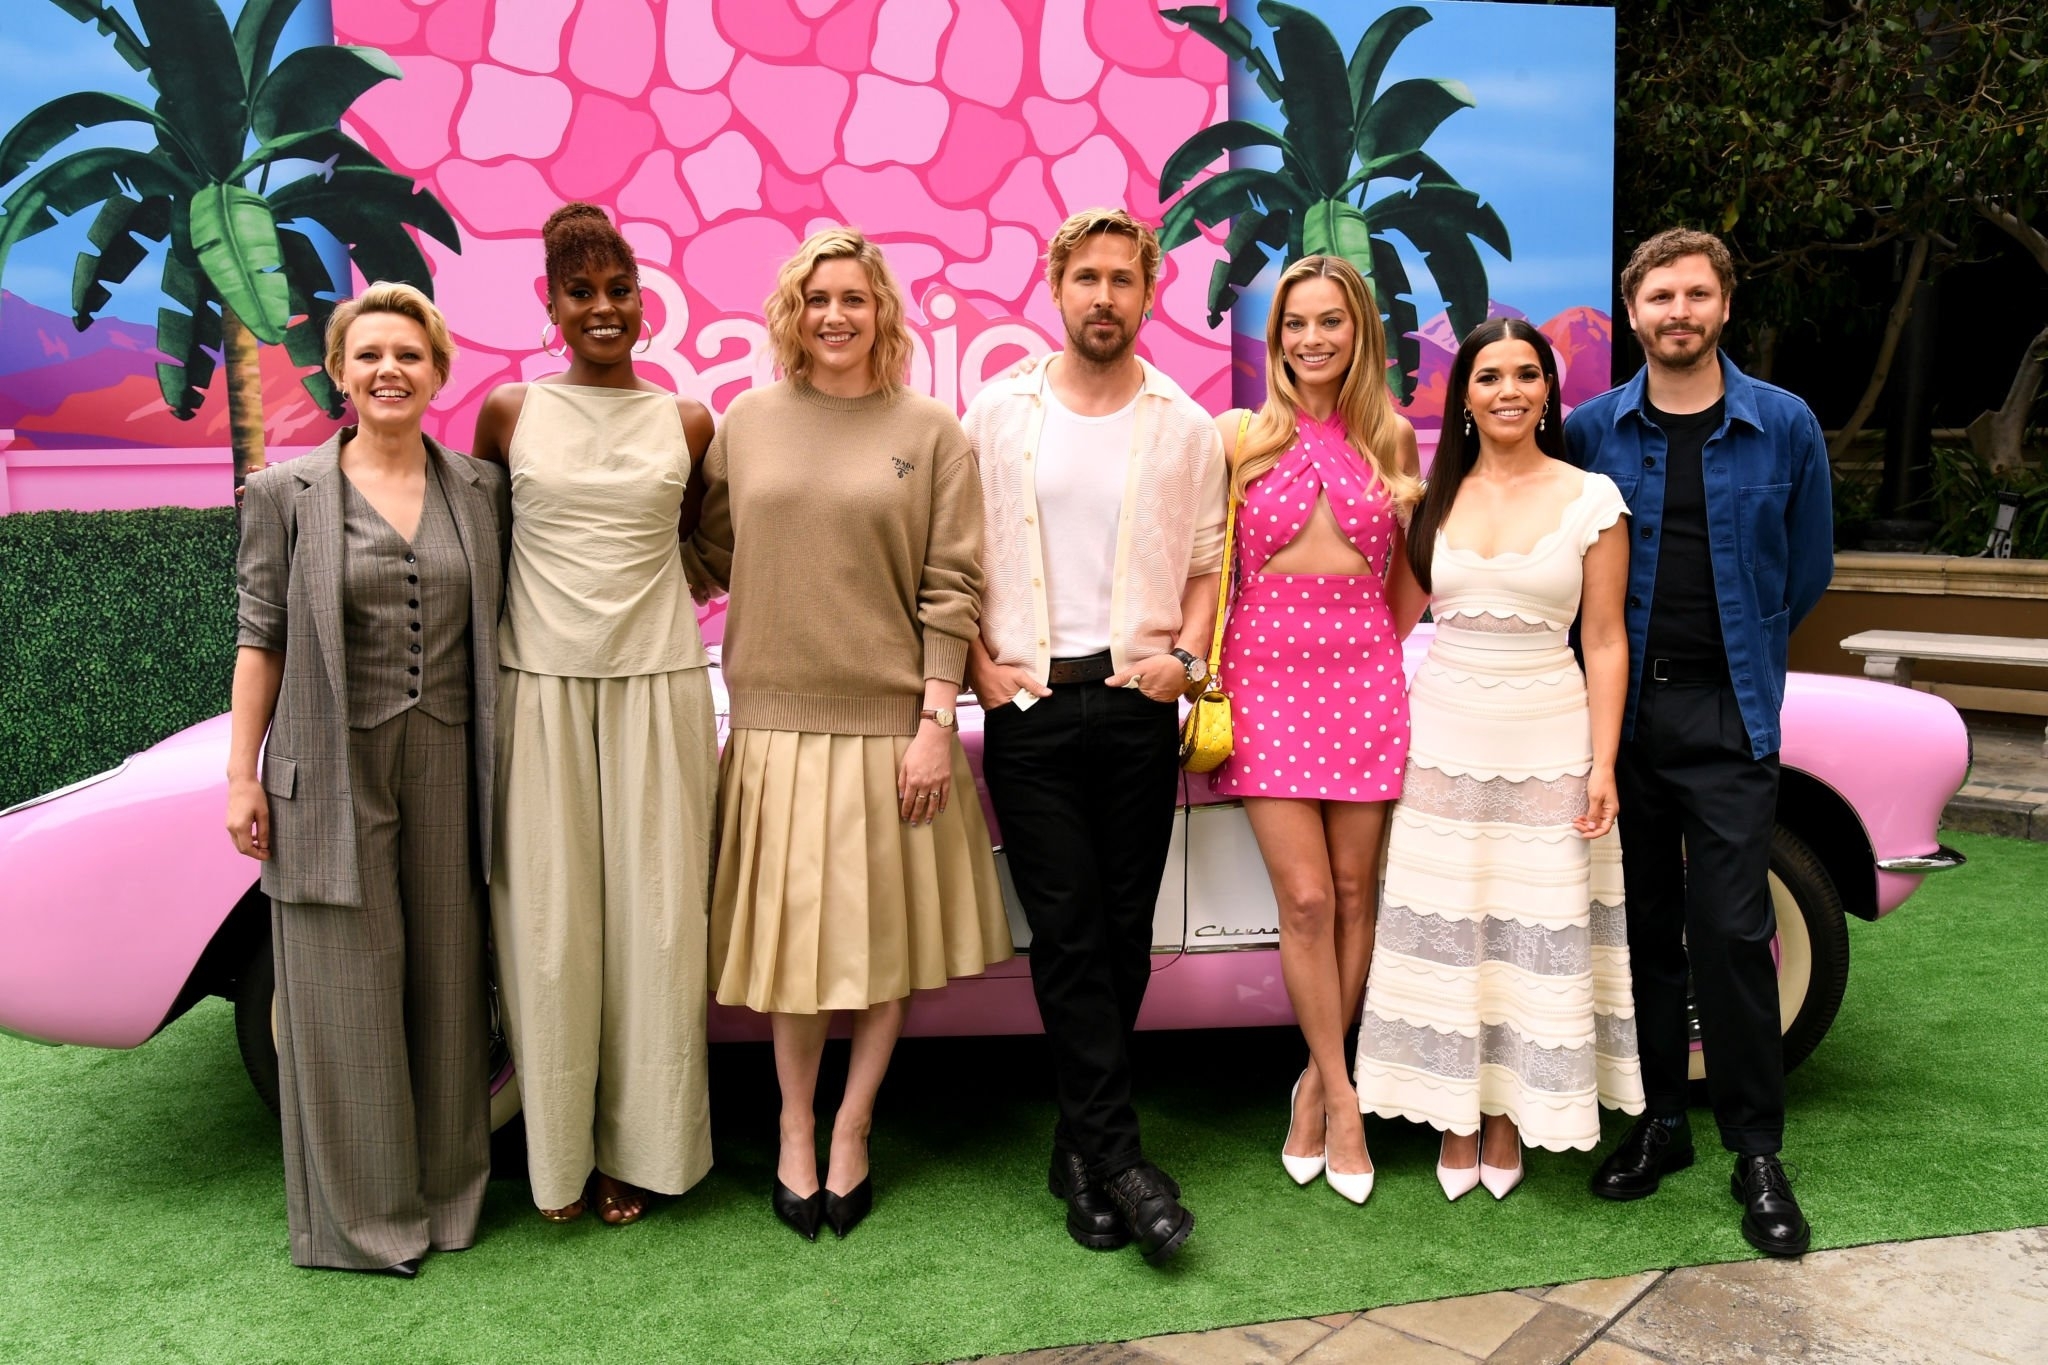 (L-R) Kate McKinnon, Issa Rae, Greta Gerwig, Ryan Gosling, Margot Robbie, America Ferrera and Michael Cera attend the press junket and photo call for "Barbie" at Four Seasons Hotel Los Angeles at Beverly Hills on June 25, 2023 in Los Angeles, California. 